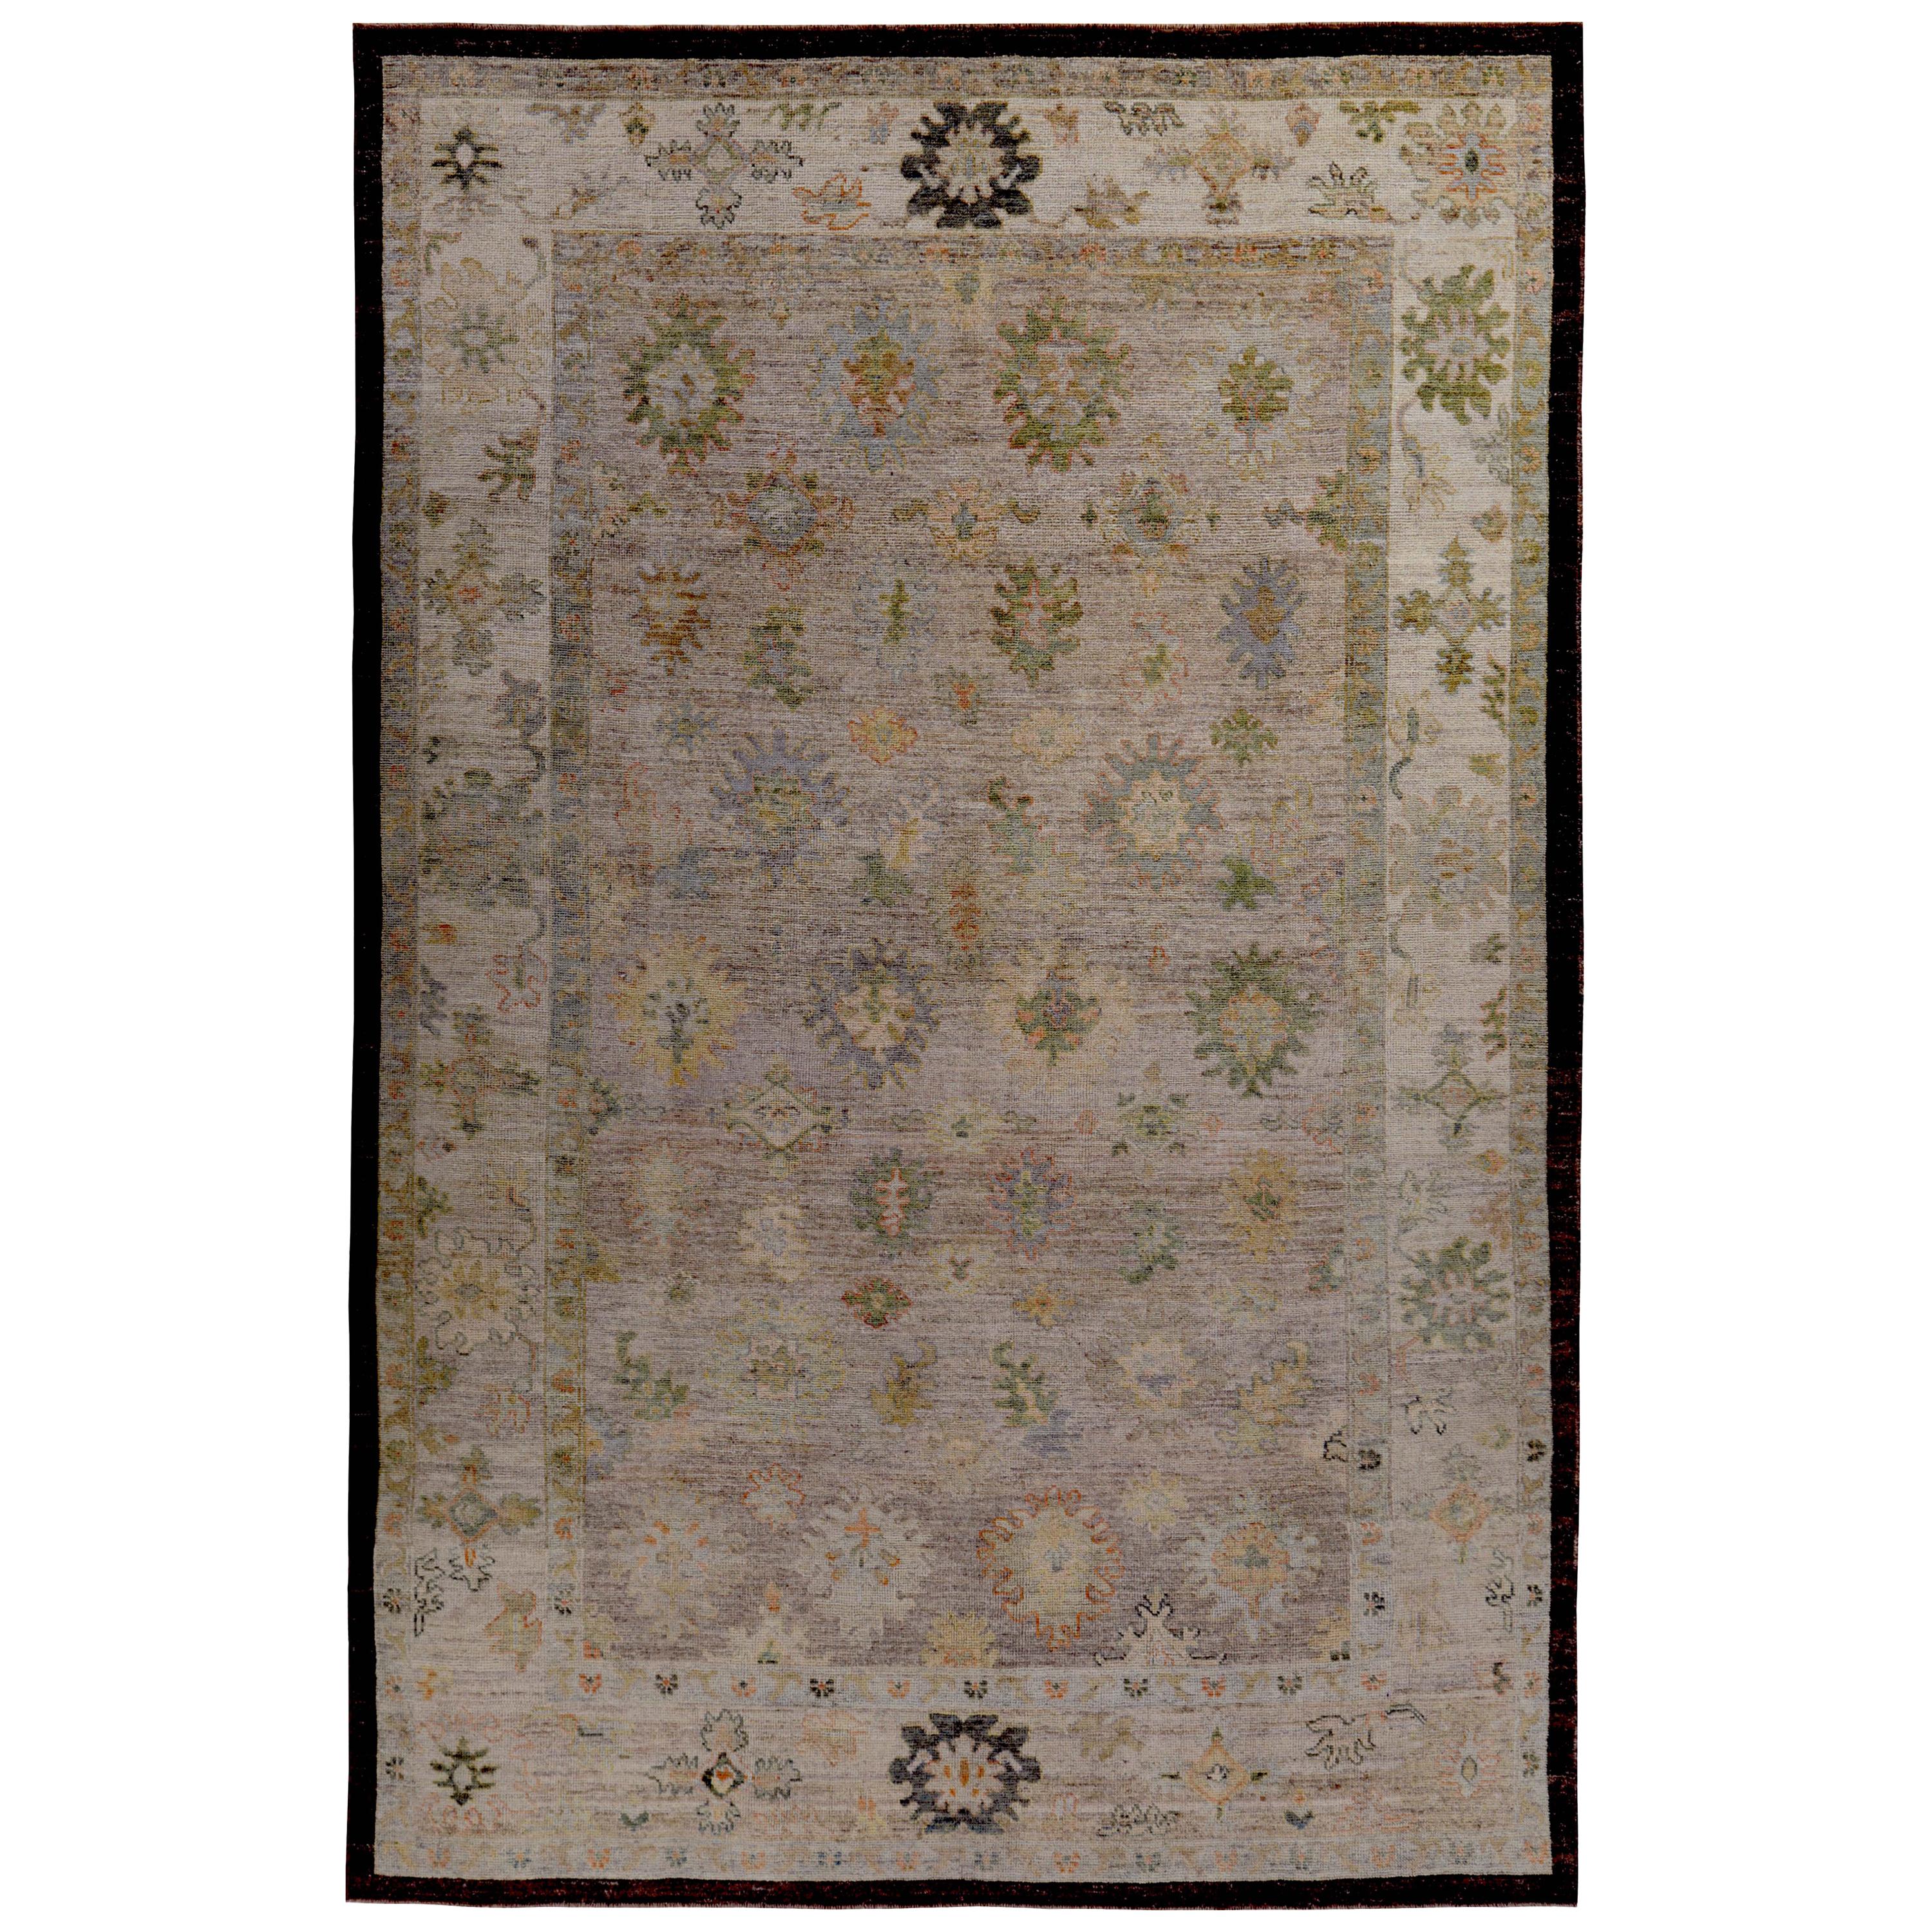 New Turkish Oushak Rug with Blue and Green Floral Details on Brown Field